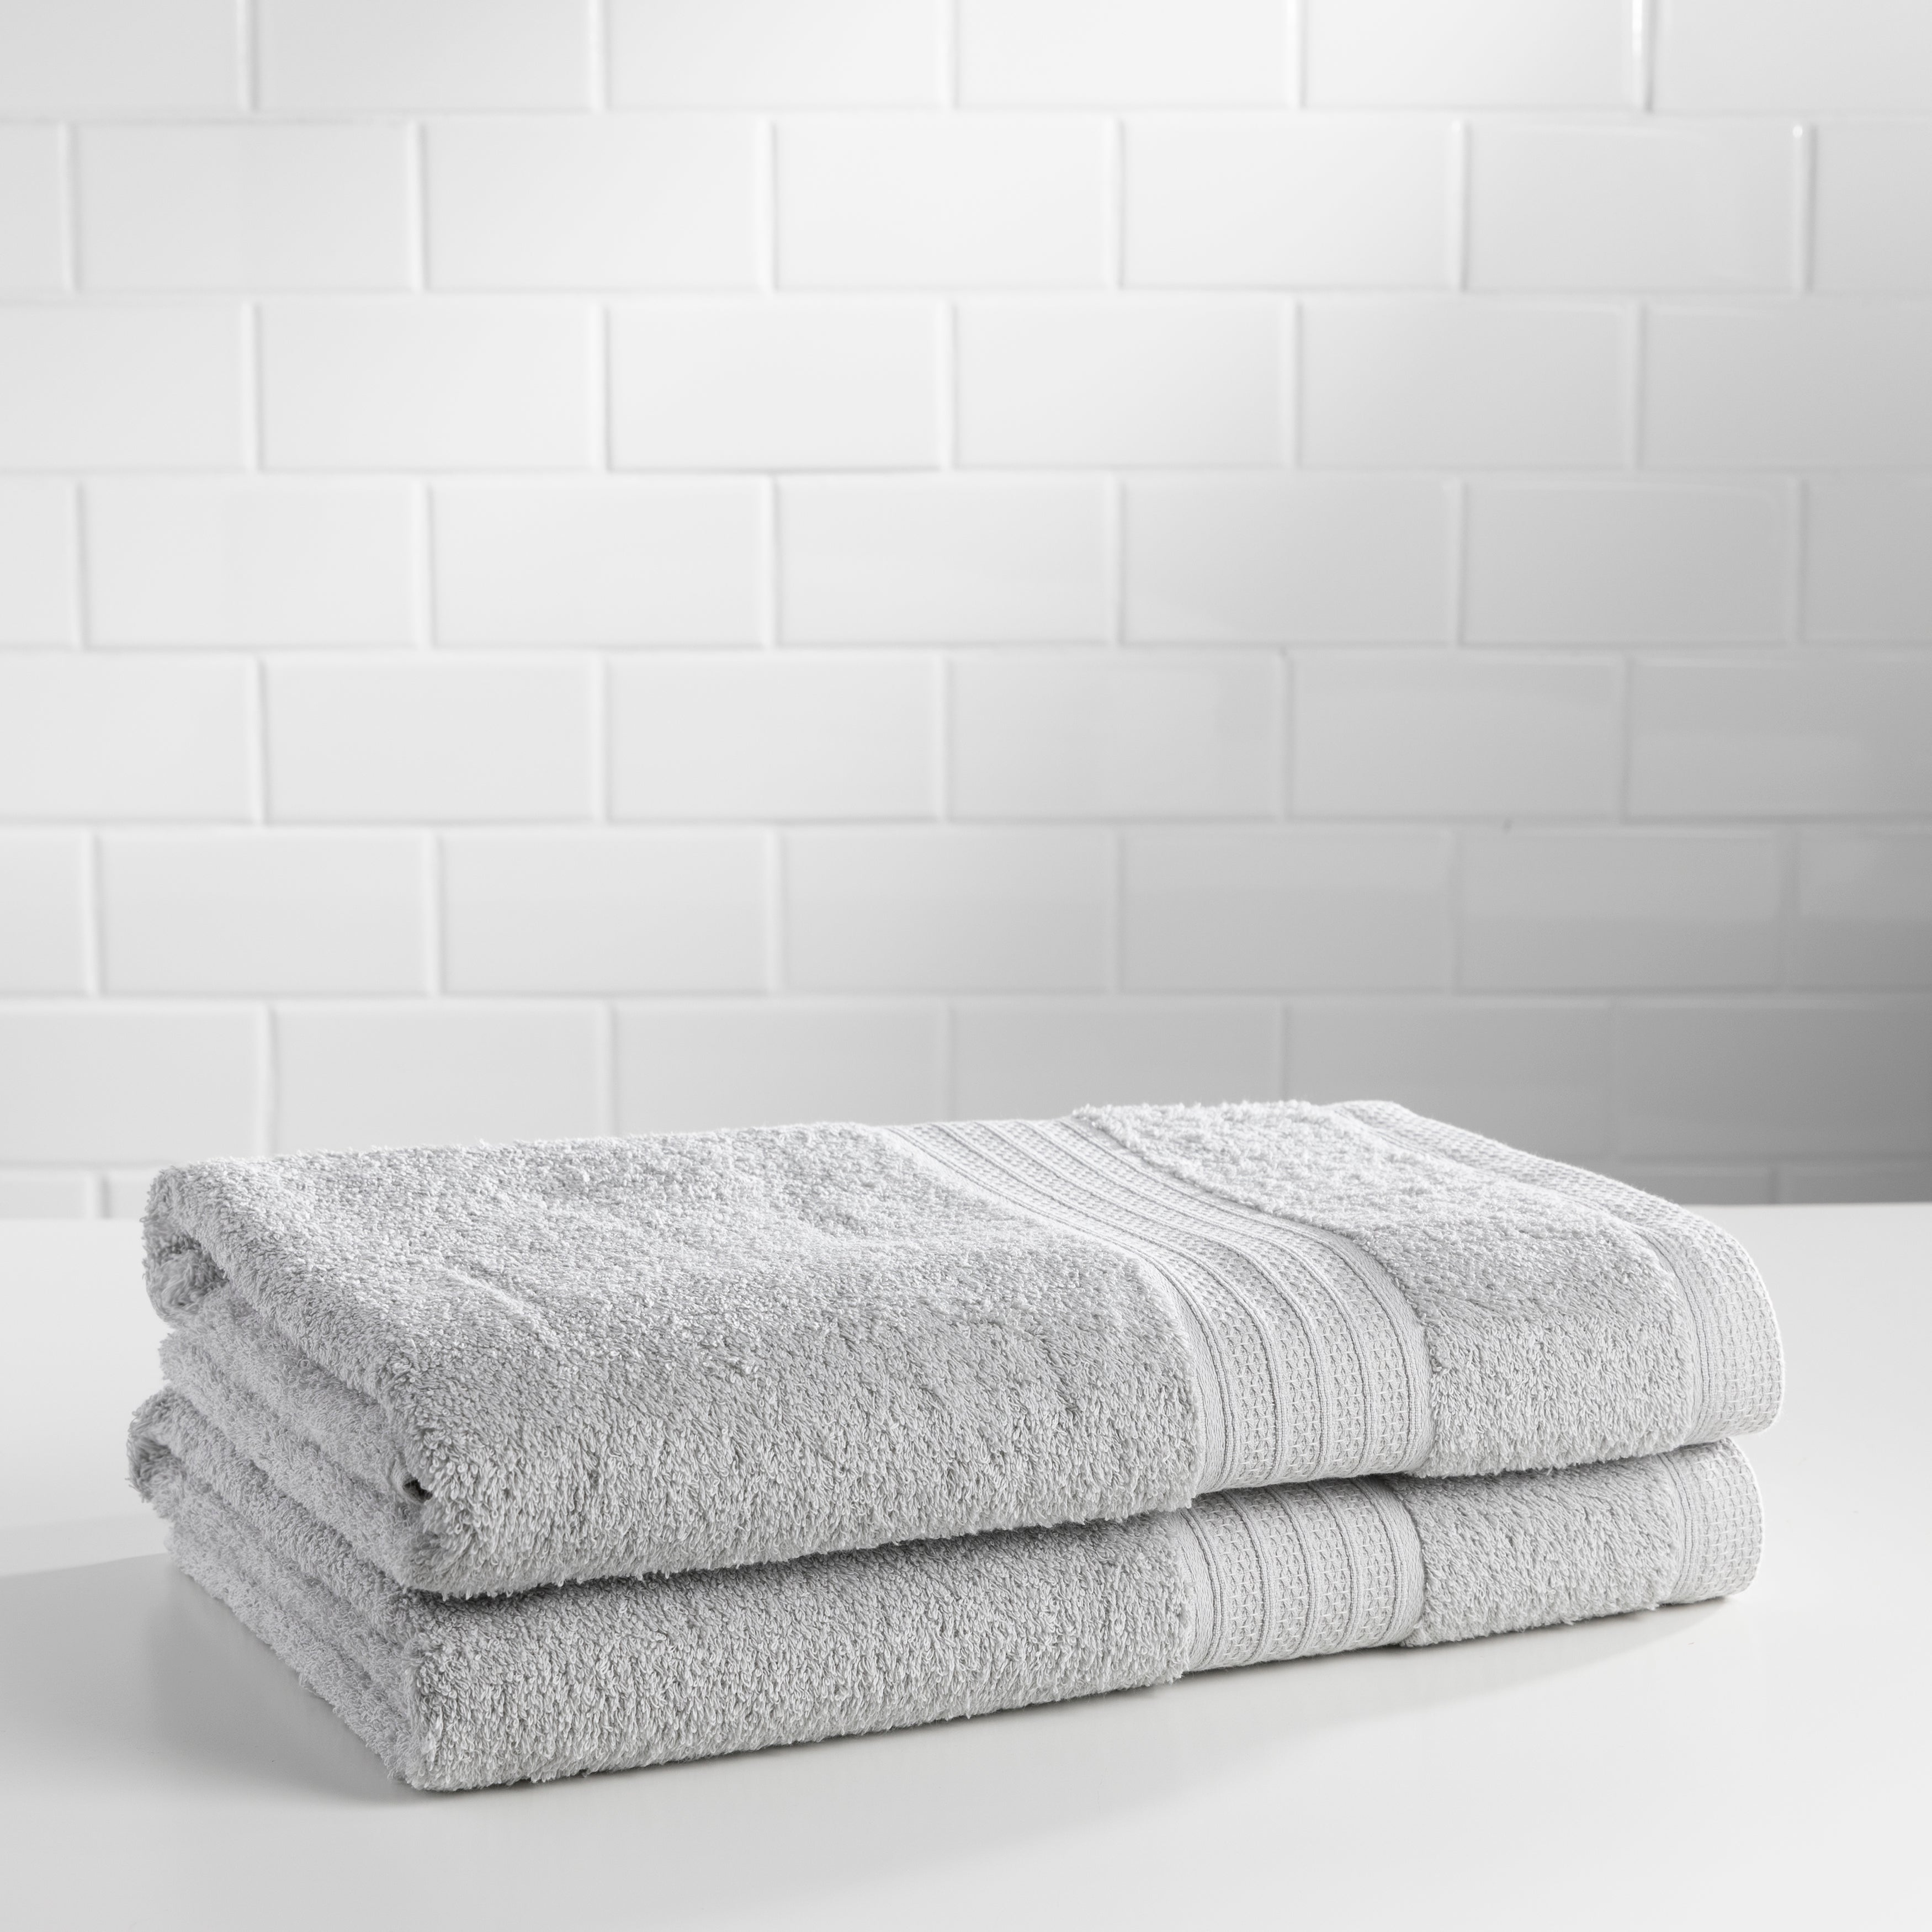 Splash! Is your Towel Pool-Ready? - Learn More About Sobel Westex Pillows  And Linens